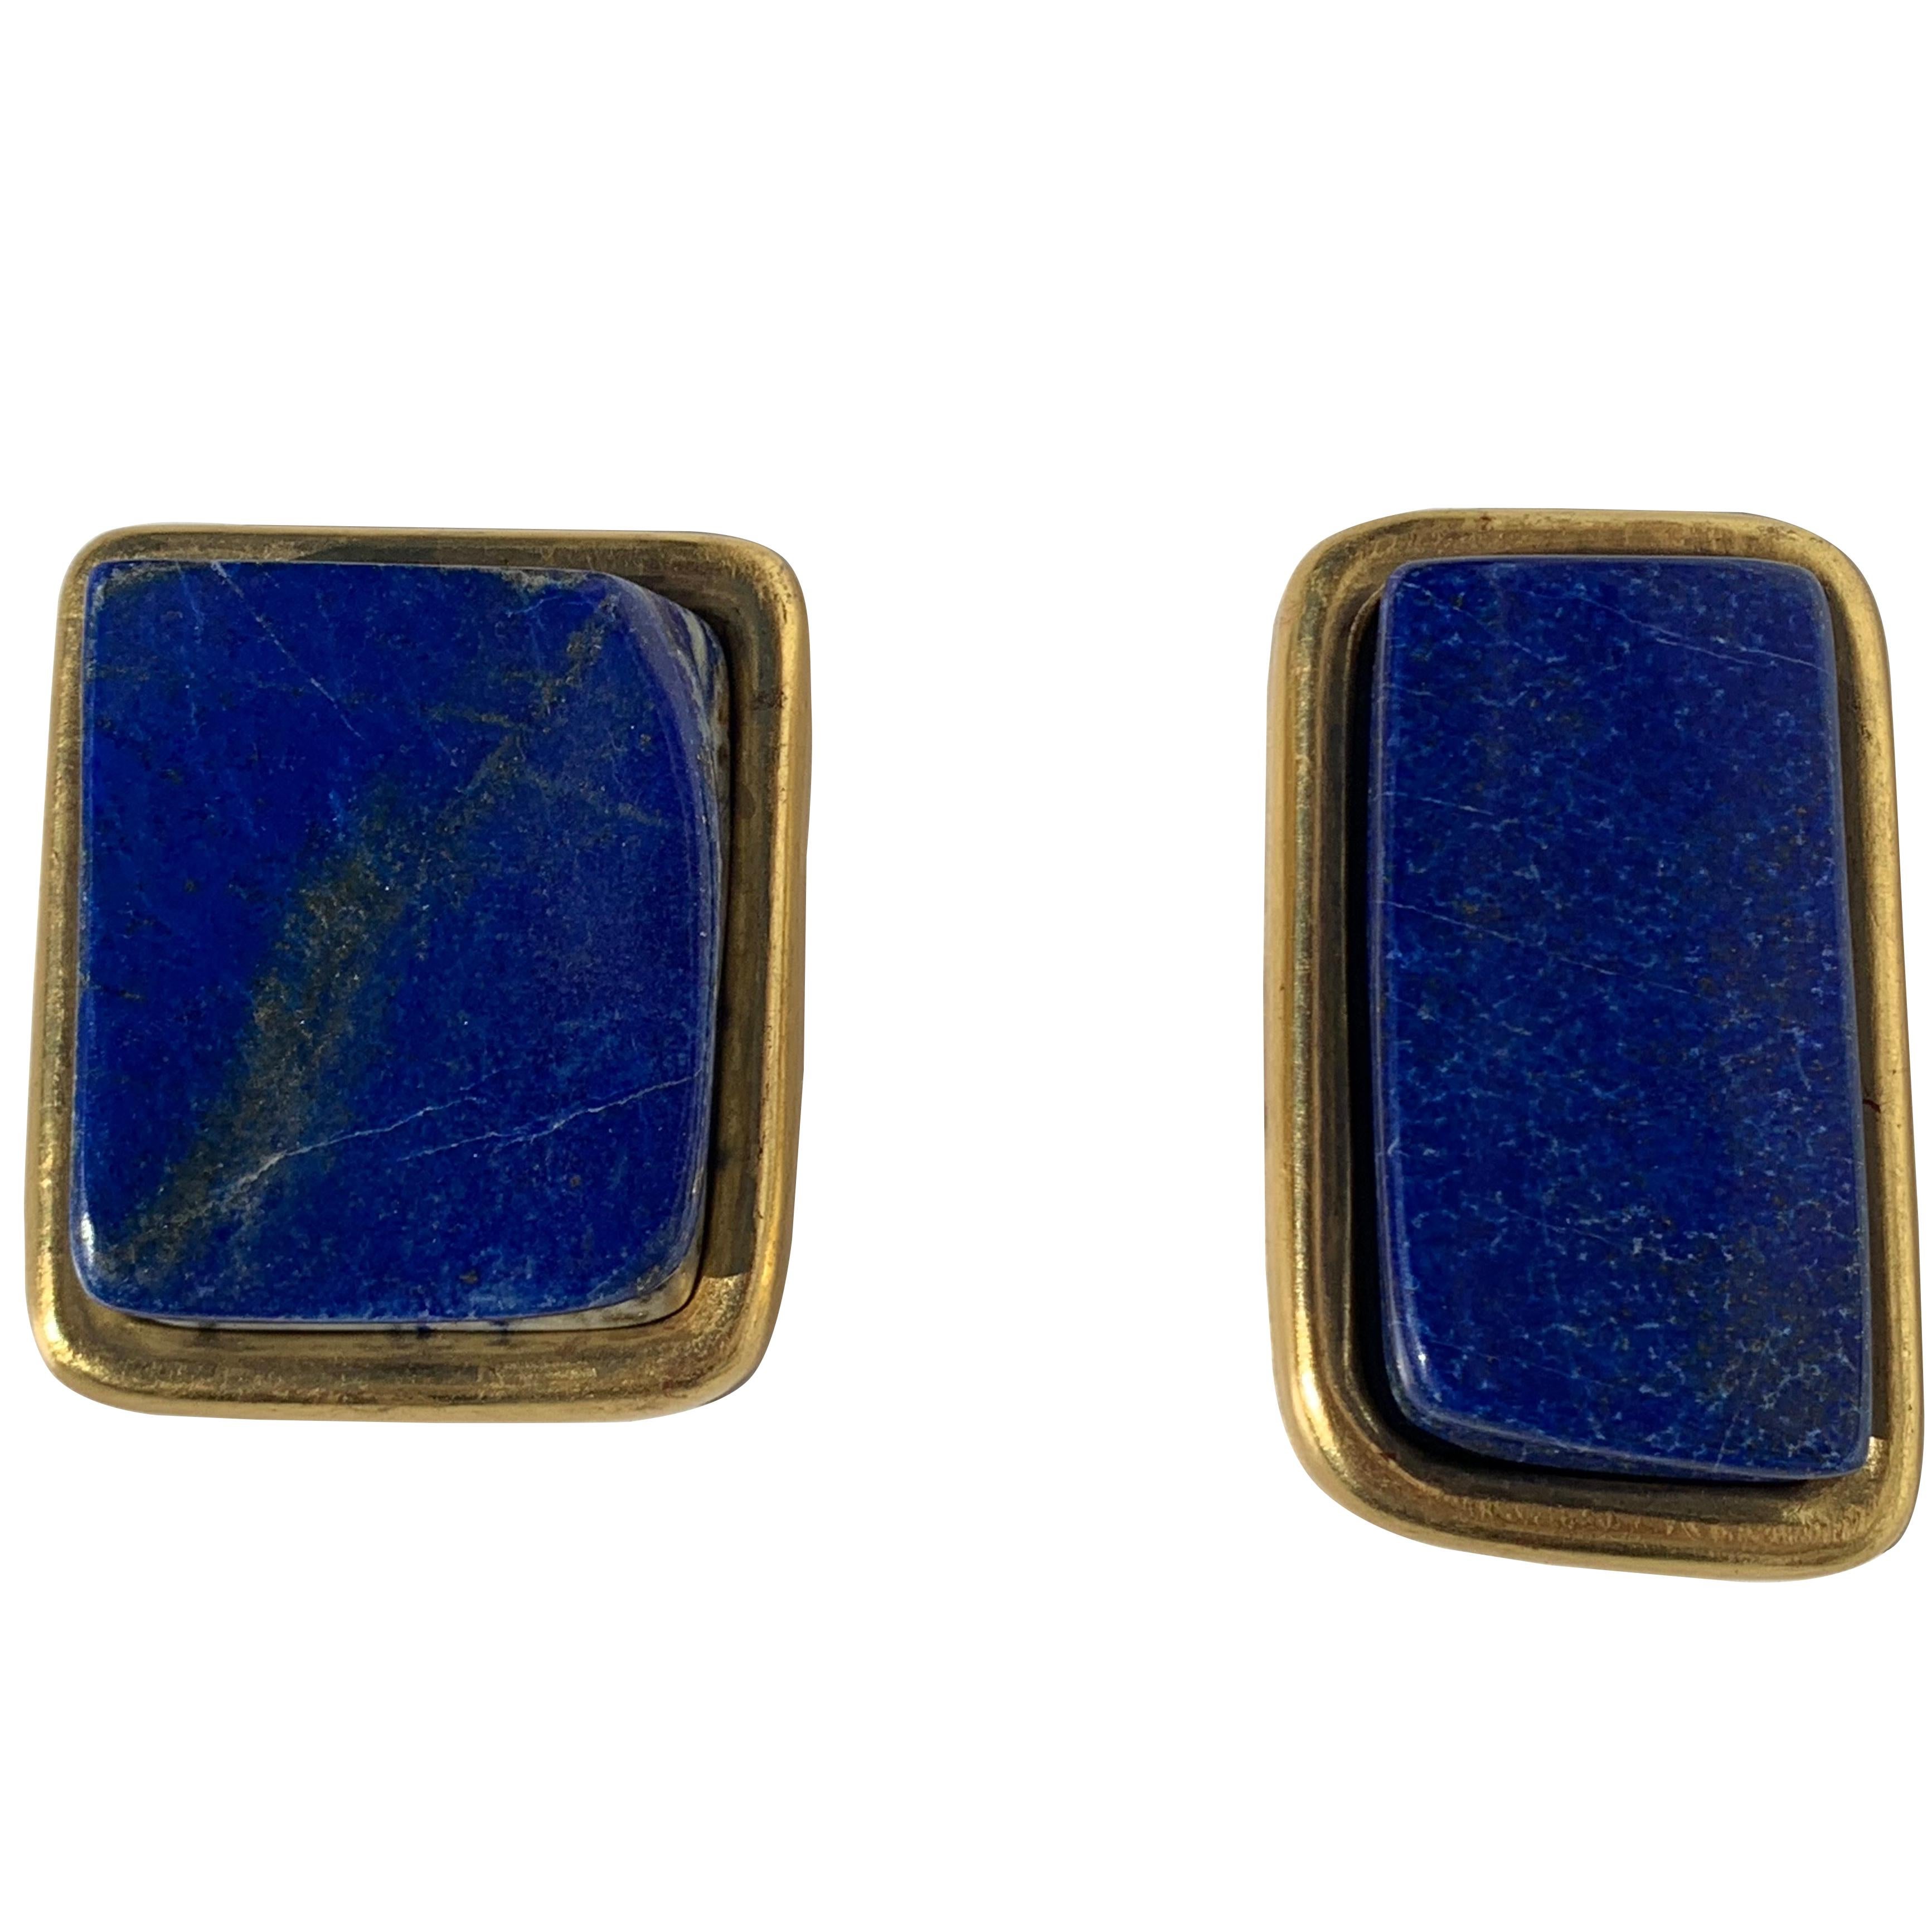 Pair of Small Lapis Lazuli and Gold Paper Weights